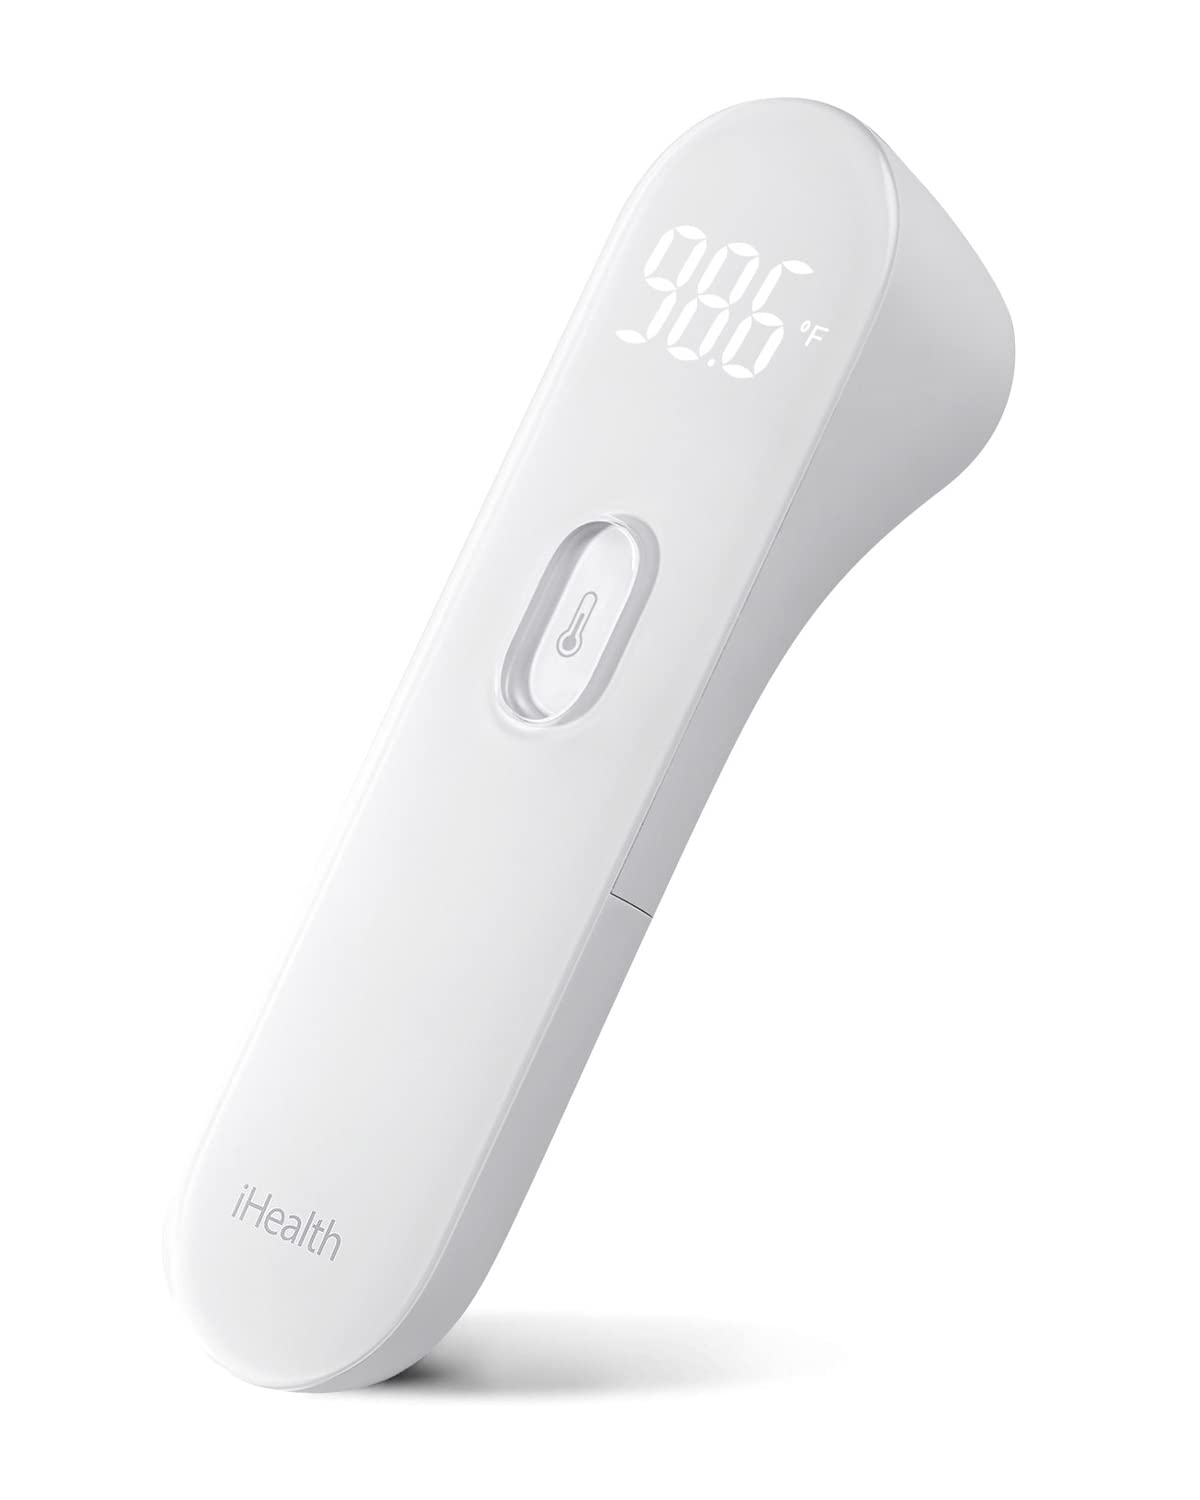 Value Bundle with iHealth Digital Ear Thermometer Model PT5 and The Classic Non-Contact Forehead Thermometer Model PT3